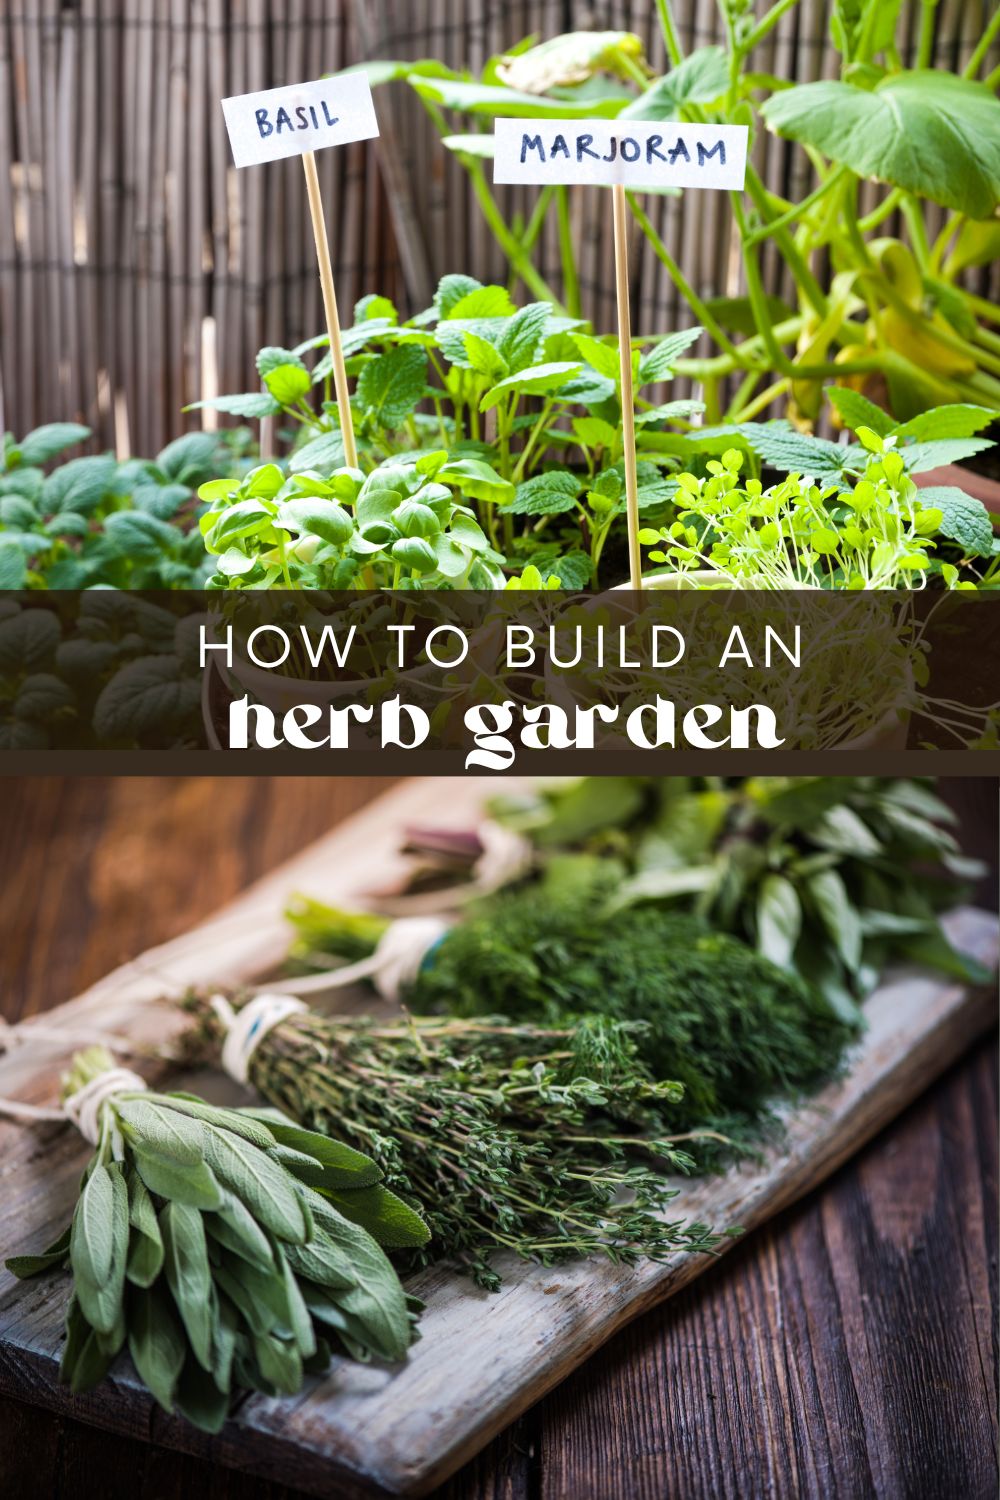 From the kitchen to your outdoor space, herbs are a great way to bring life into your home. These useful little plants can be used in various ways, from adding flavor to your cooking to providing natural healing ingredients and creating a peaceful environment. With the right amount of planning and care, you can create a beautiful and useful herb garden!